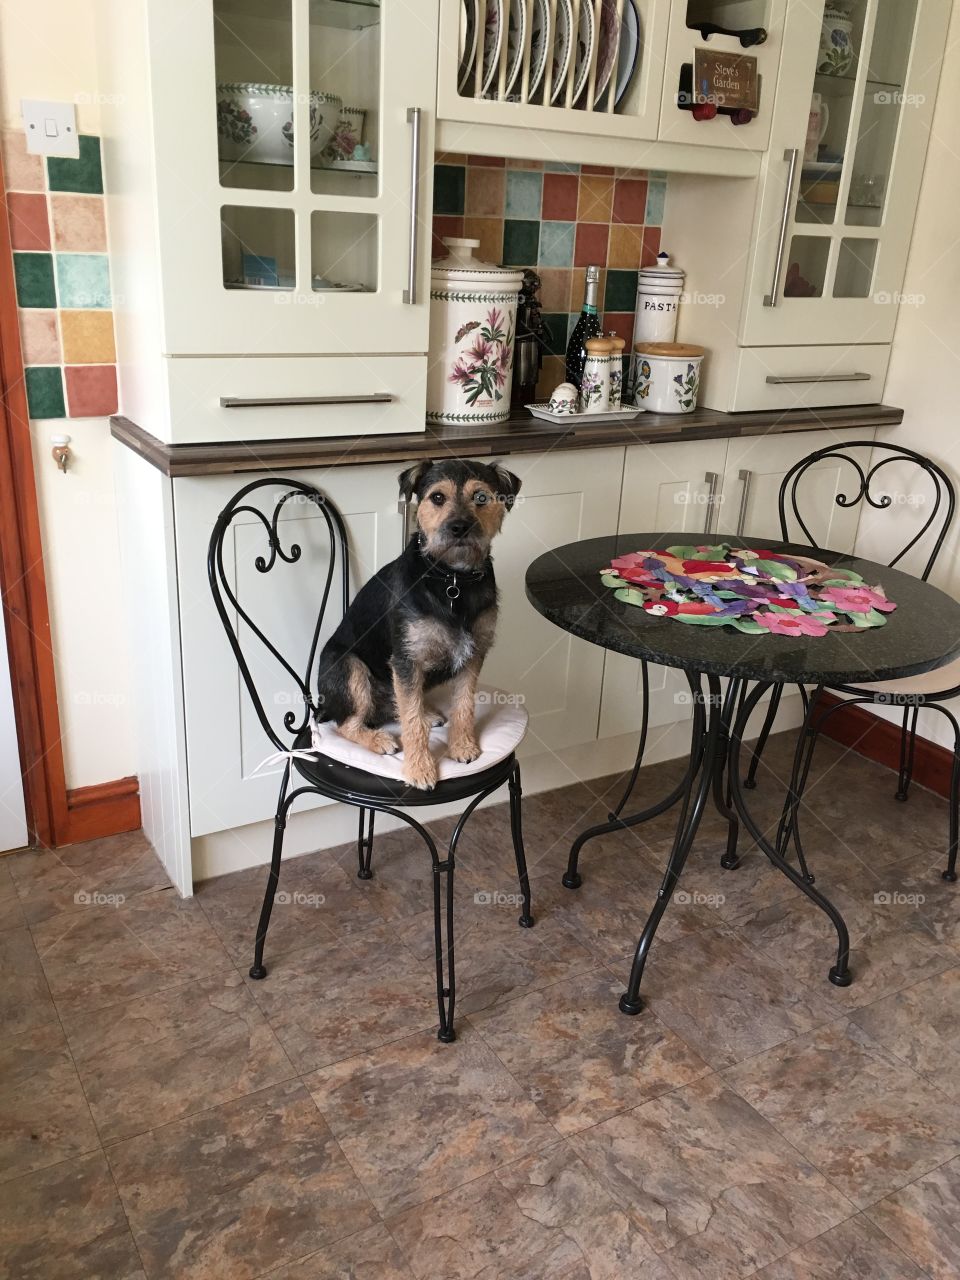 Sid the Lakeland terrier sat at the kitchen table hoping for food